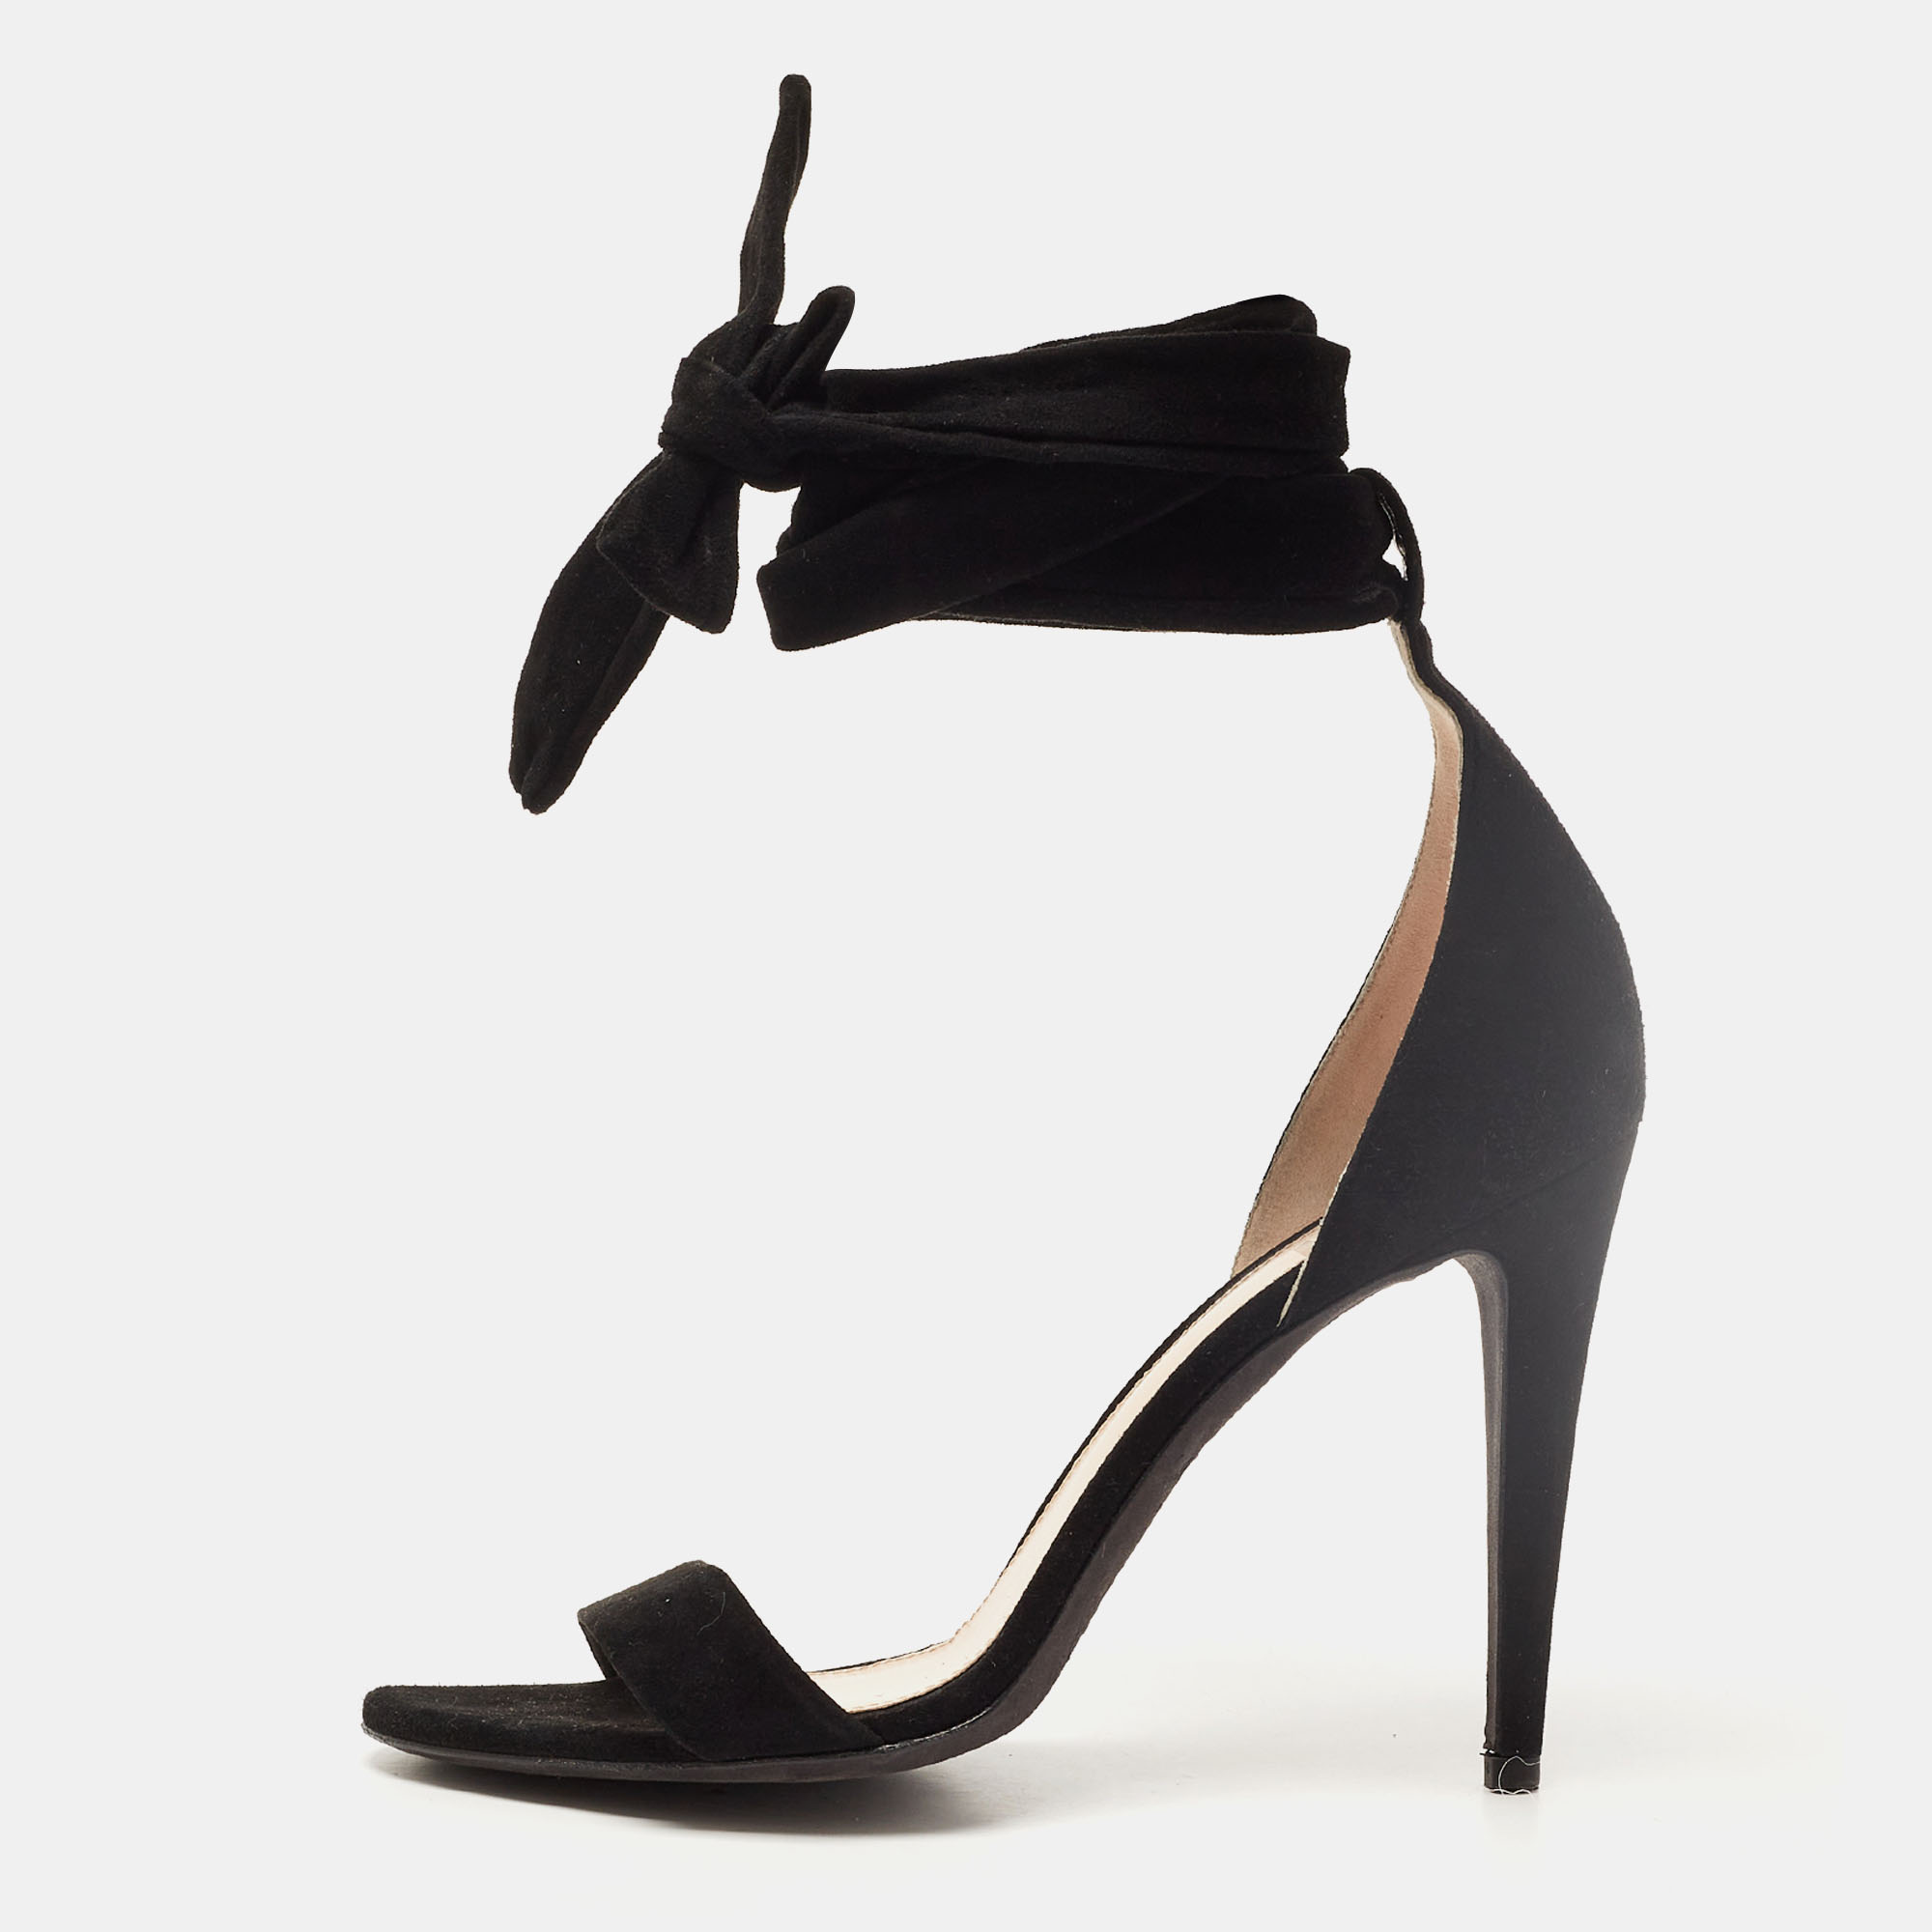 Off-White Black Suede Ankle Wrap Sandals Size 39